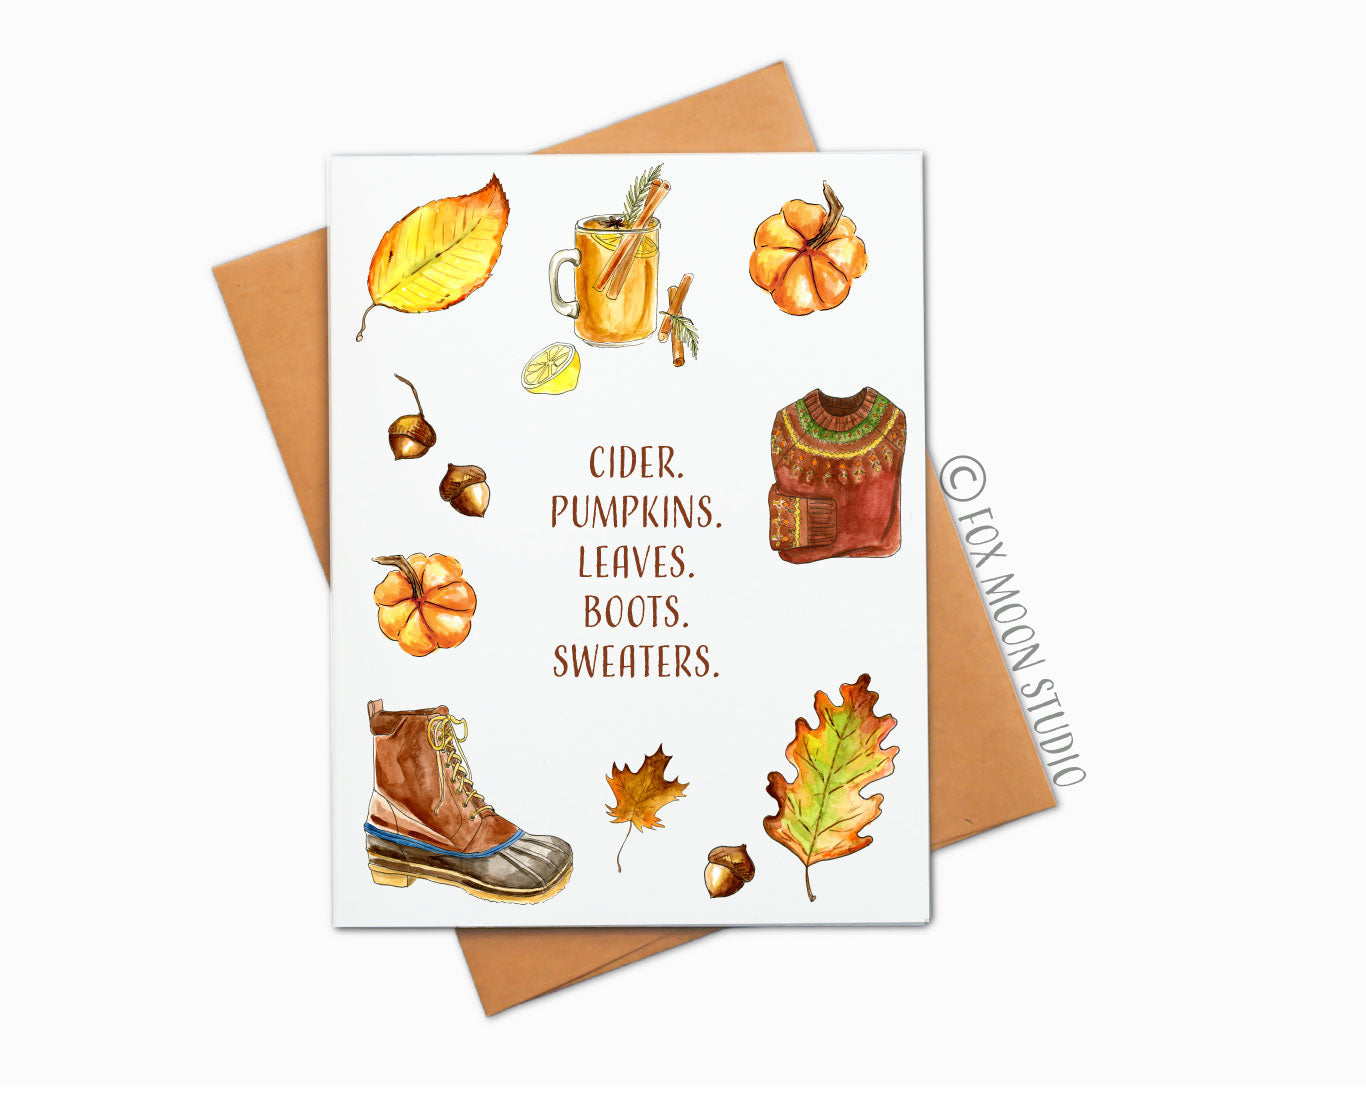 Cider. Pumpkins. Leaves. Boots. Sweaters. - Fall Greeting Card